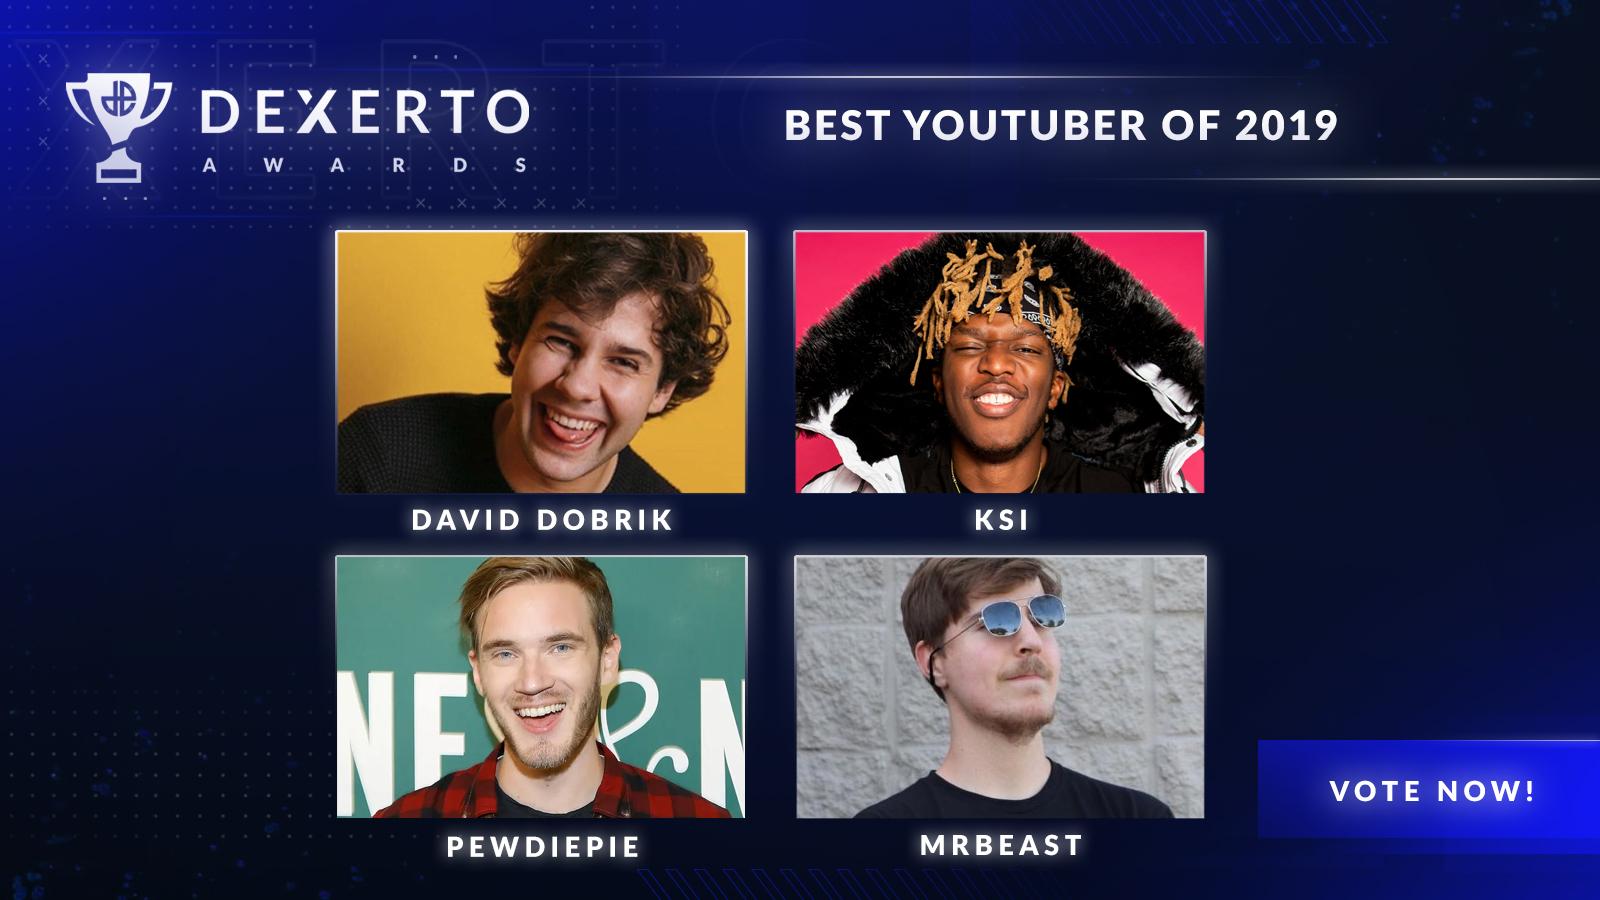 The four best YouTubers of 2019